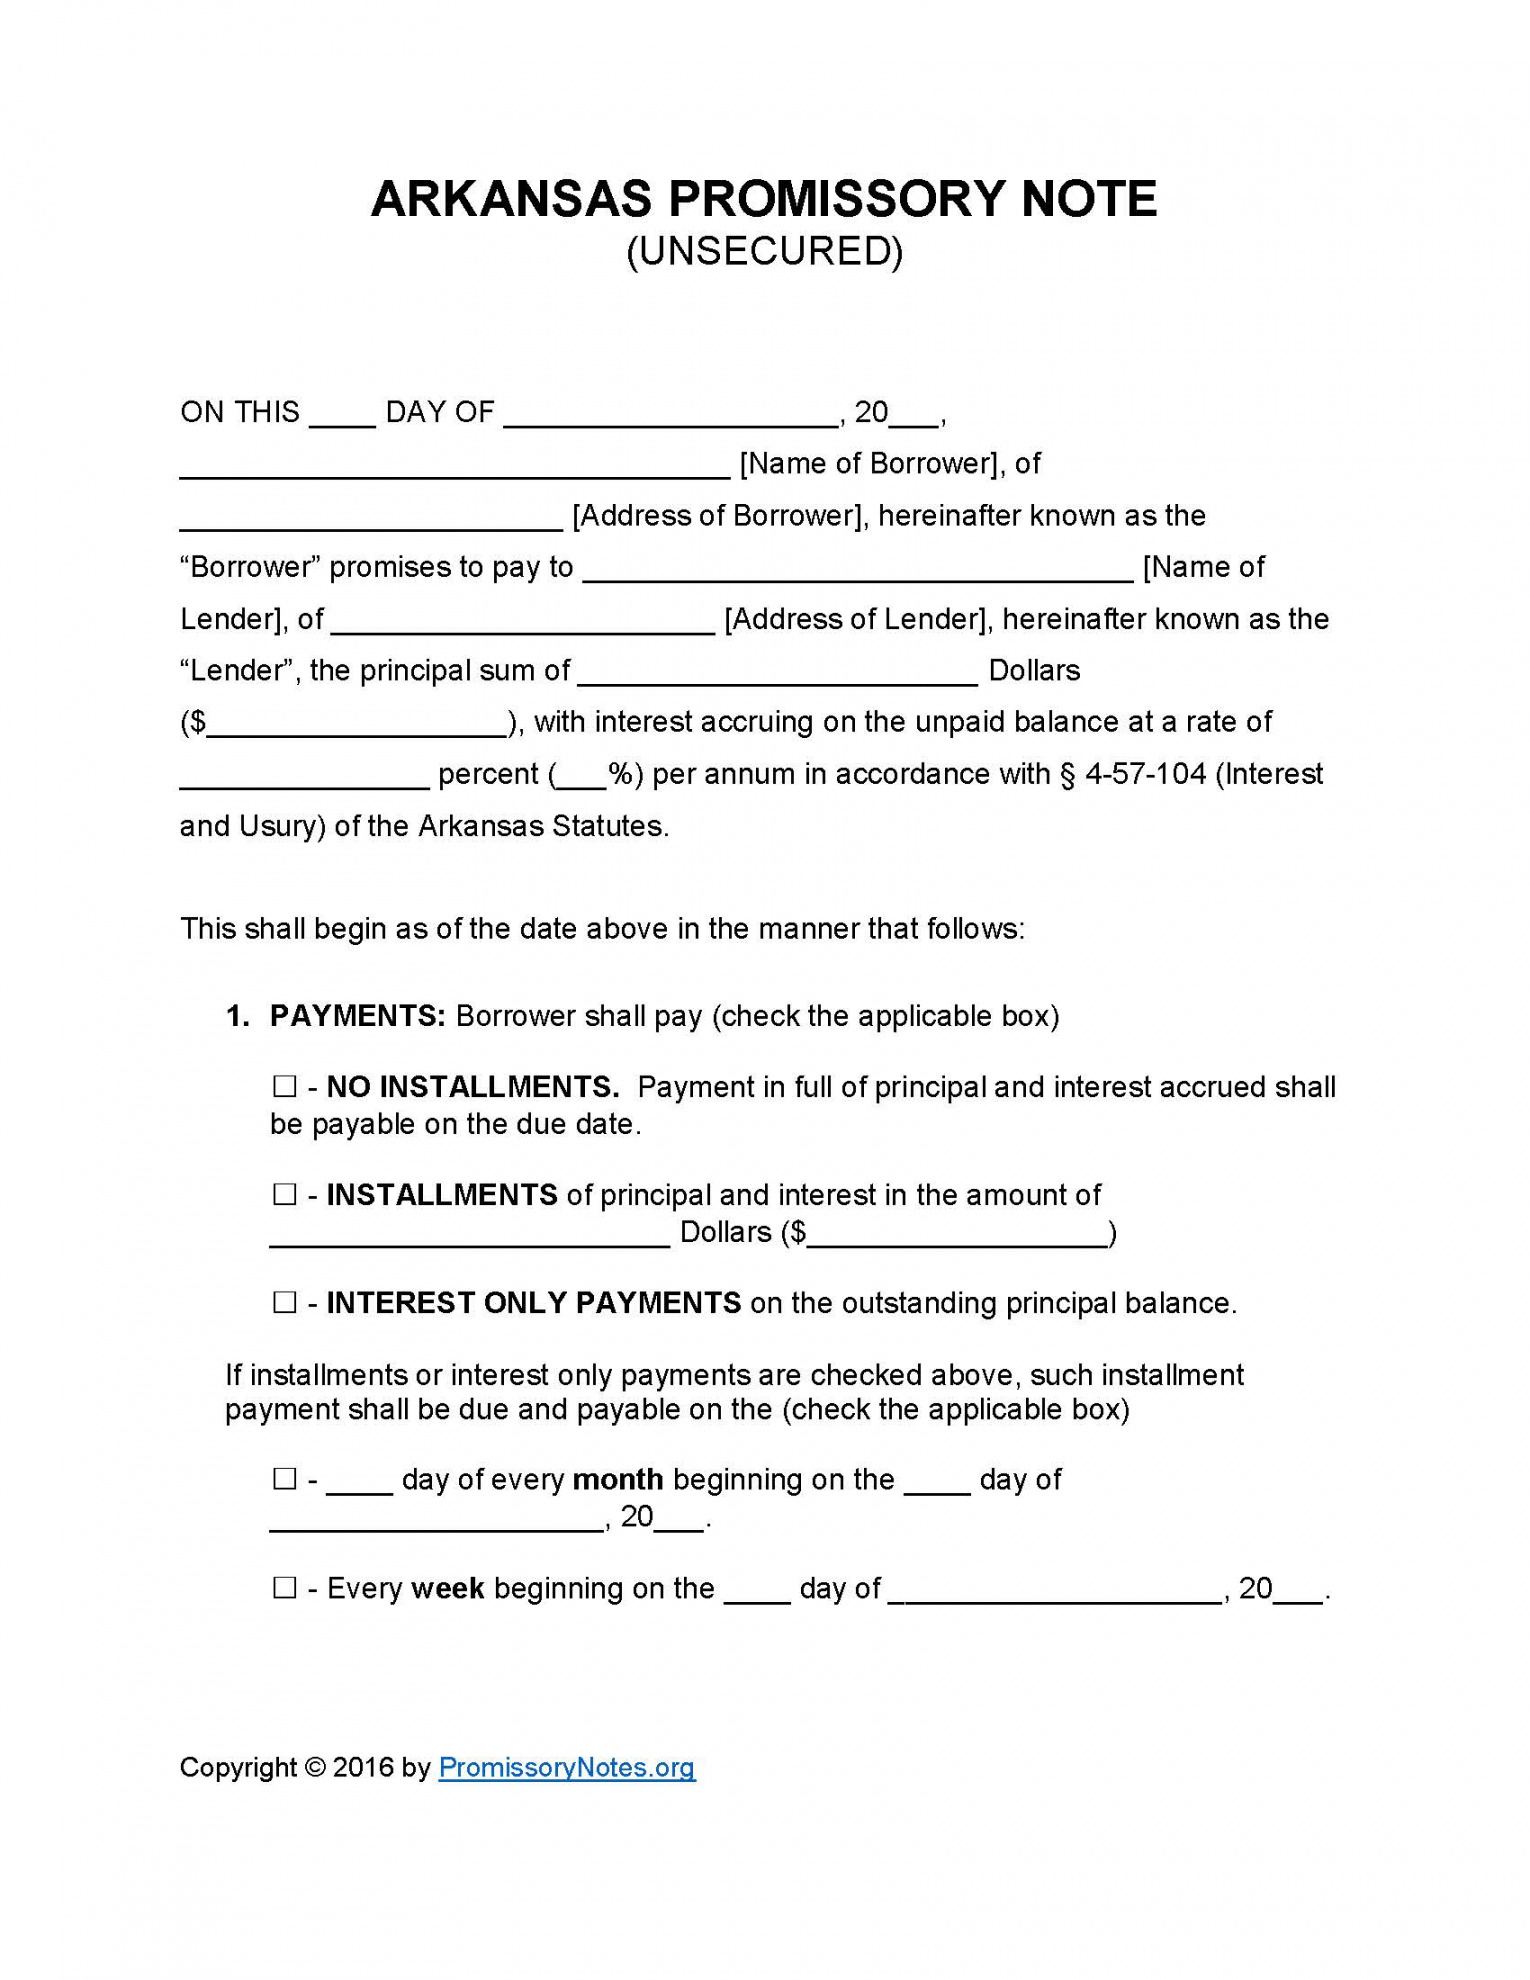 arkansas unsecured promissory note template  promissory promissory note template for personal loan pdf